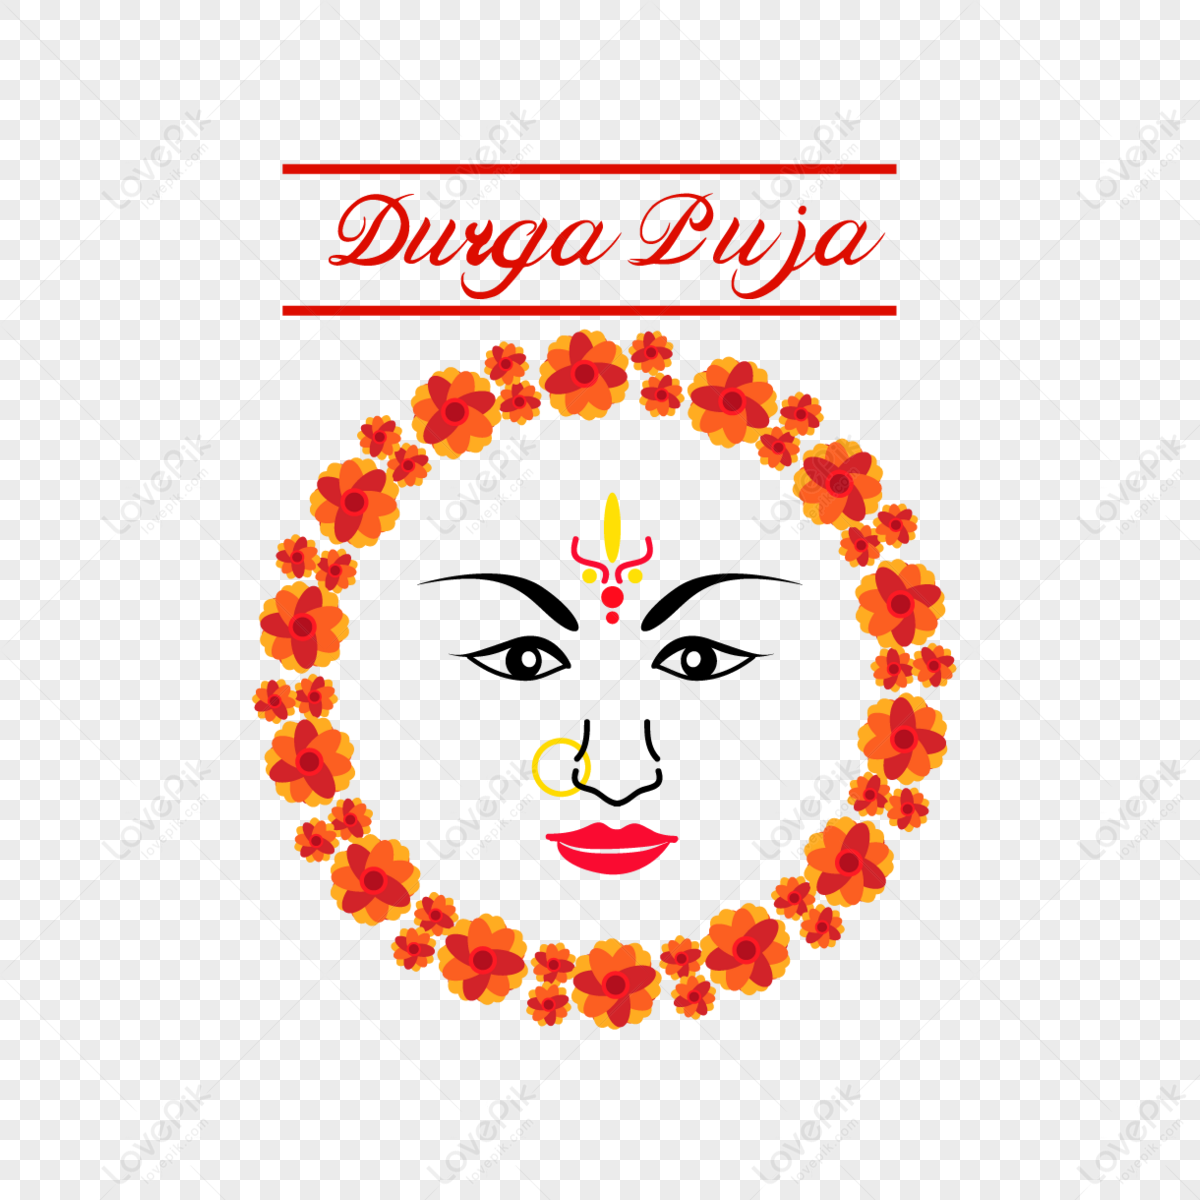 Festival Durga Puja Vector Hd Images, Happy Durga Puja Circle Logo With  Trishul, Trishul, Durga Puja, Festival PNG Image For Free Download